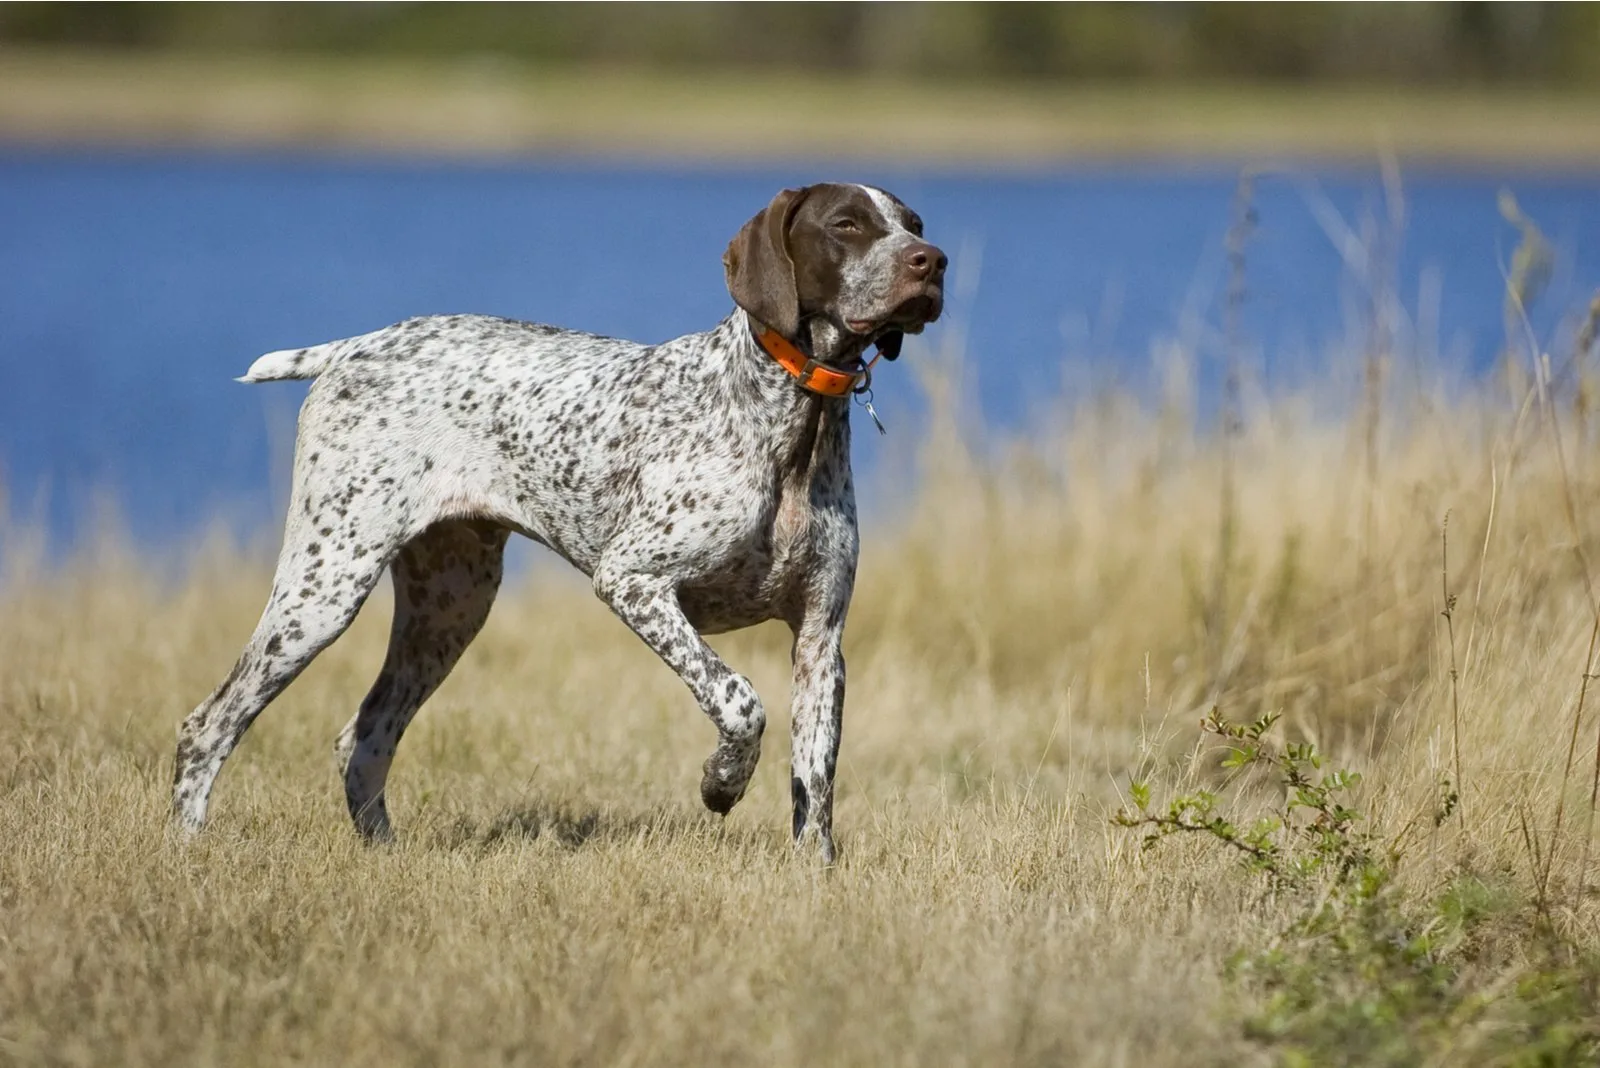 German Shorthaired Pointer dog by water